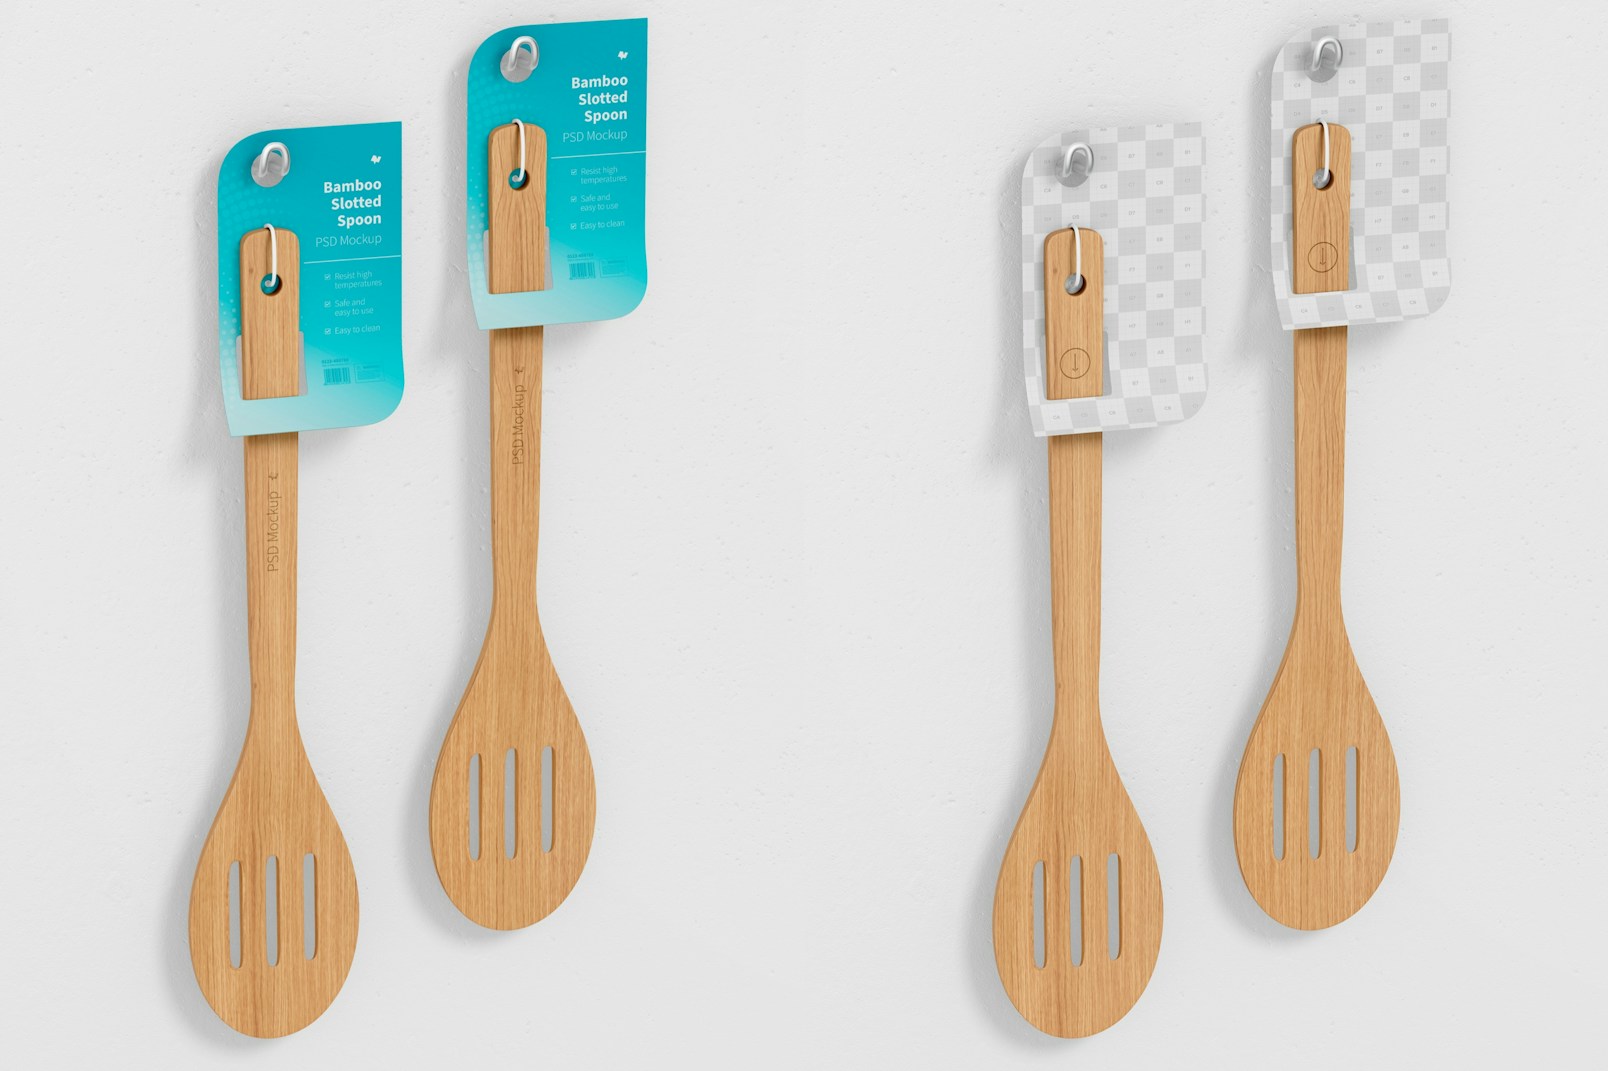 Bamboo Slotted Spoons Mockup, Hanging on Wall